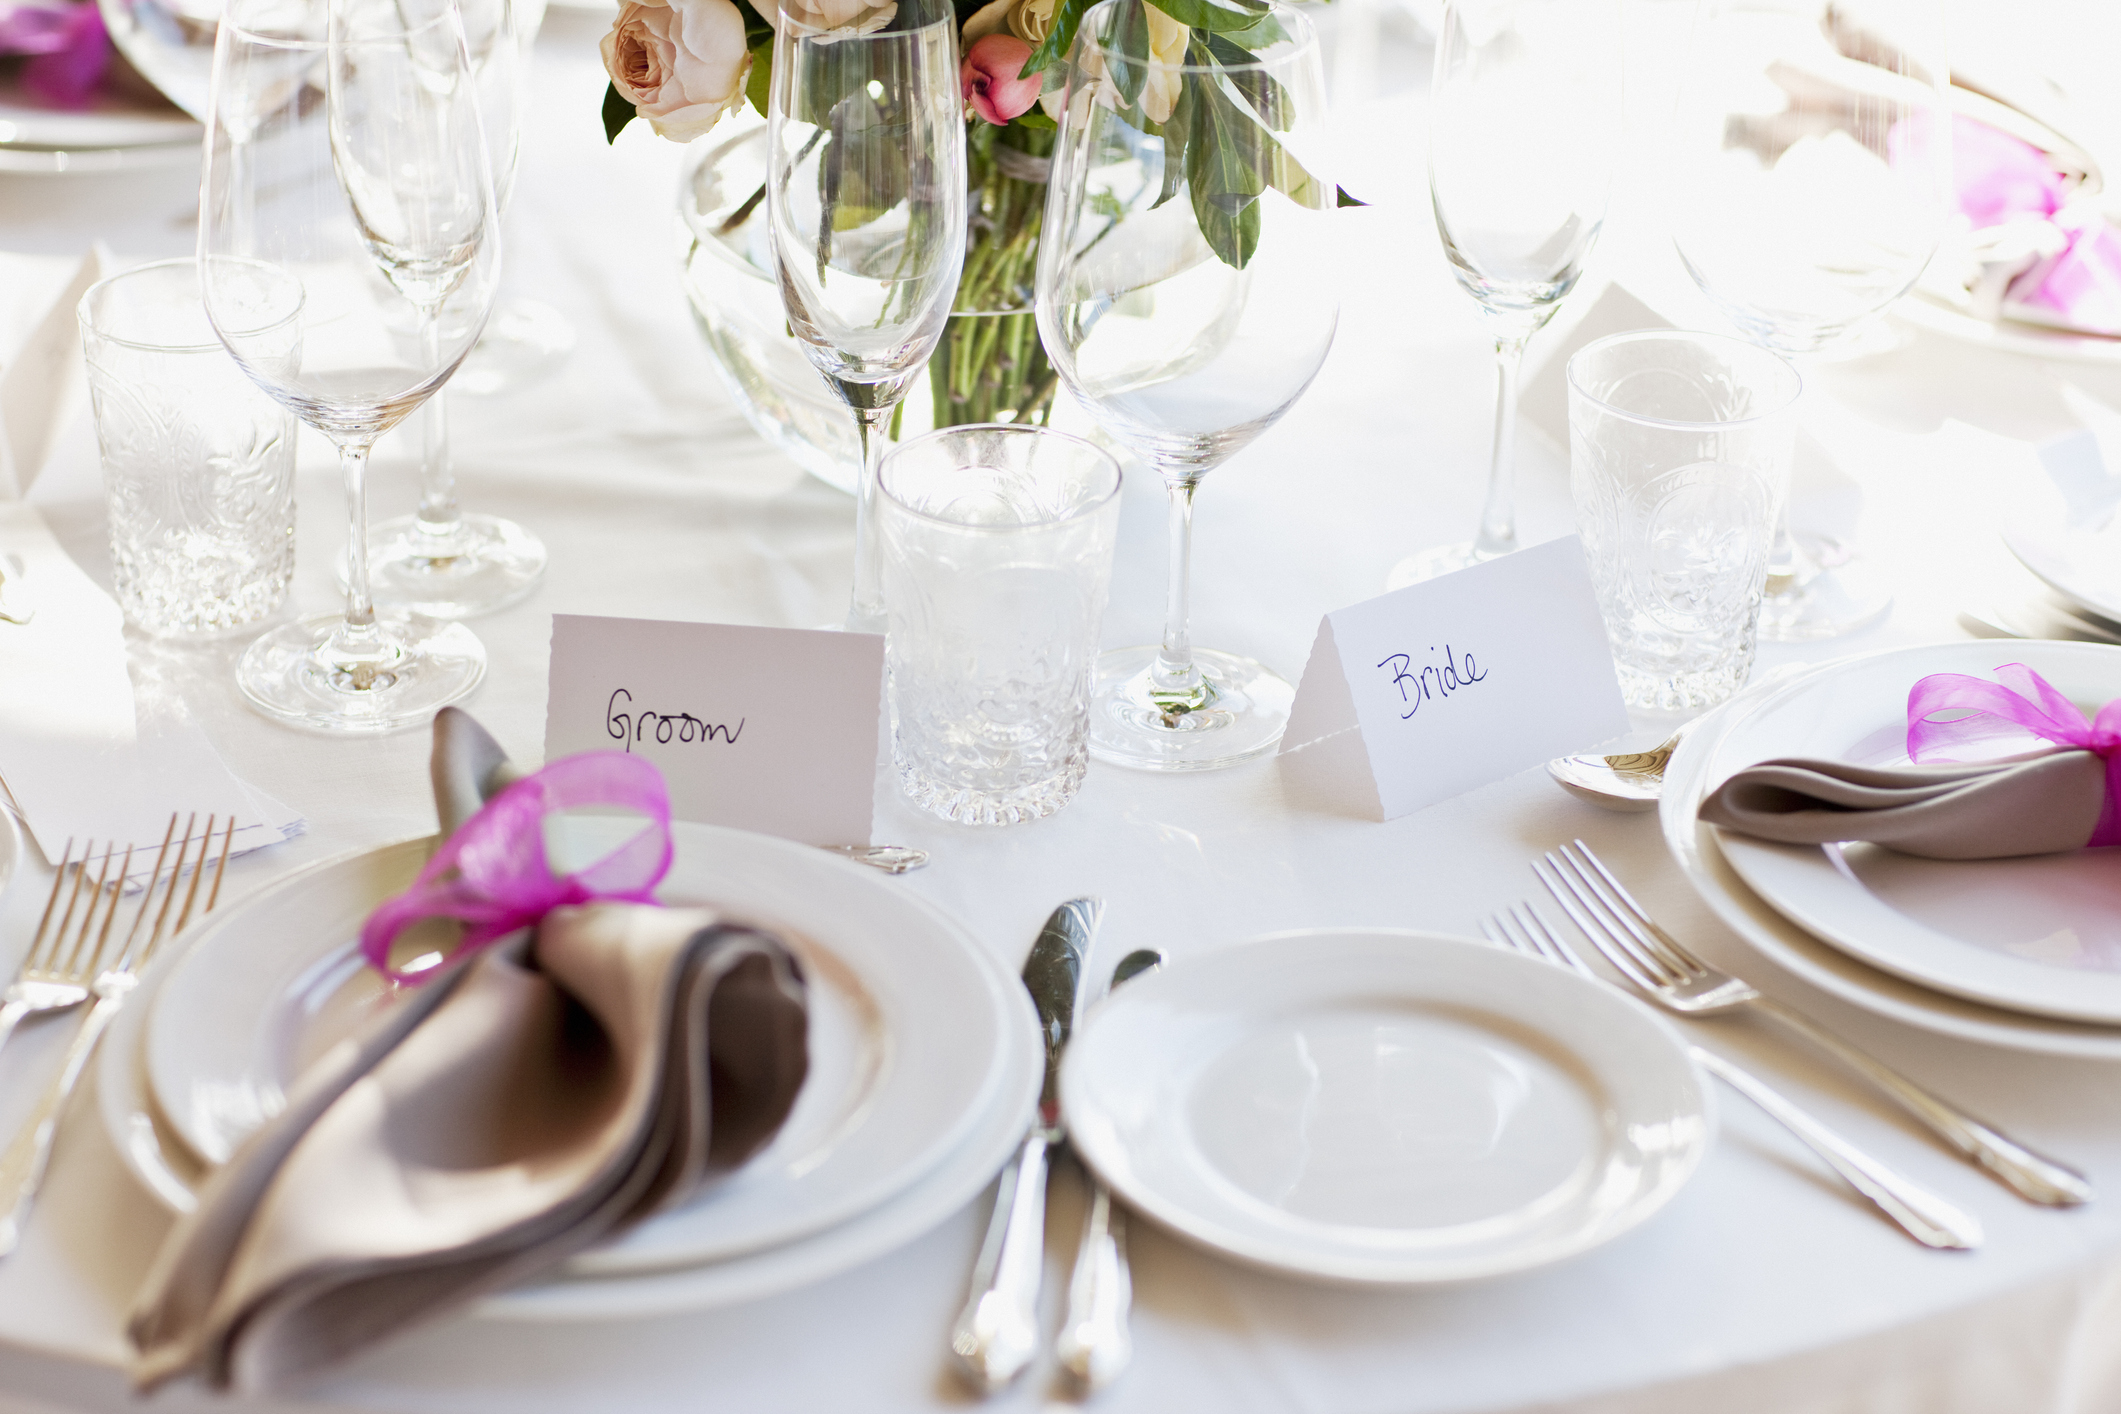 Close up of place setting at wedding reception